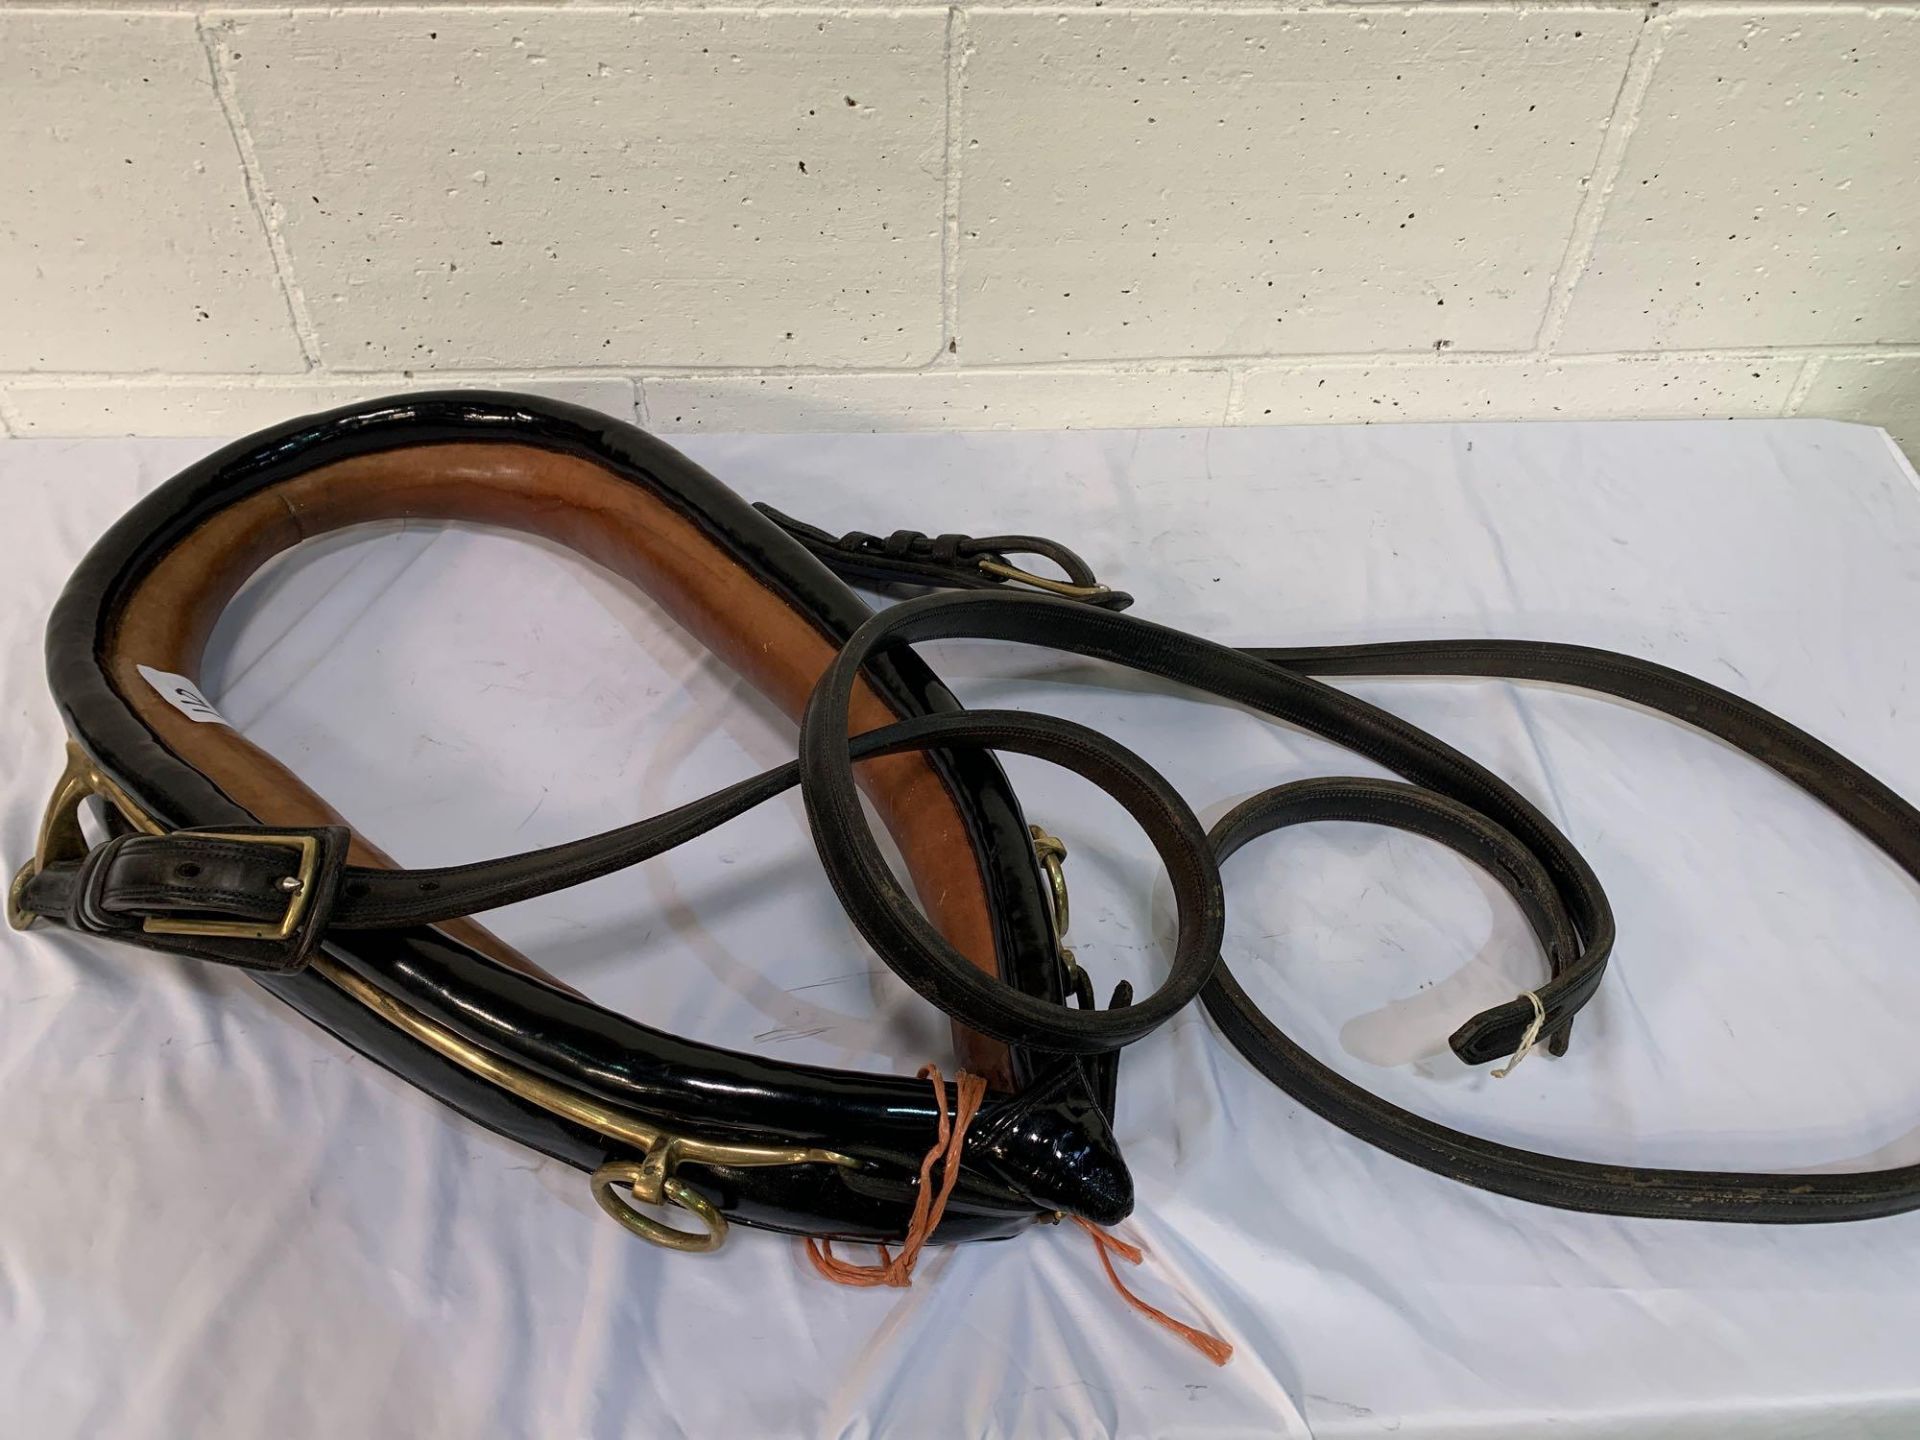 Set of black/patent harness with a 25ins collar to fit a 14hh cob.